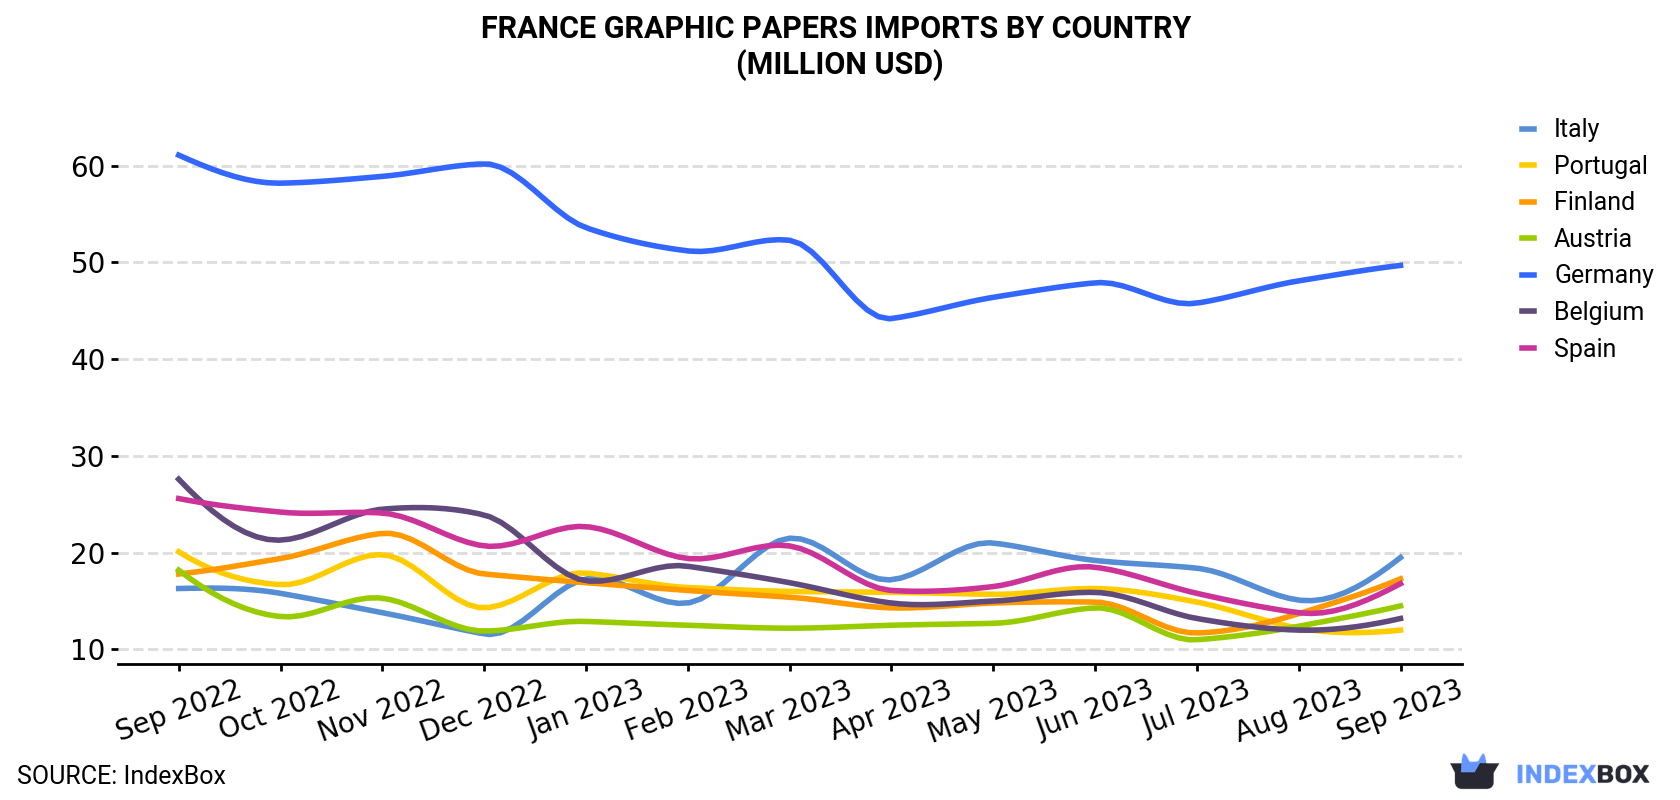 France Graphic Papers Imports By Country (Million USD)